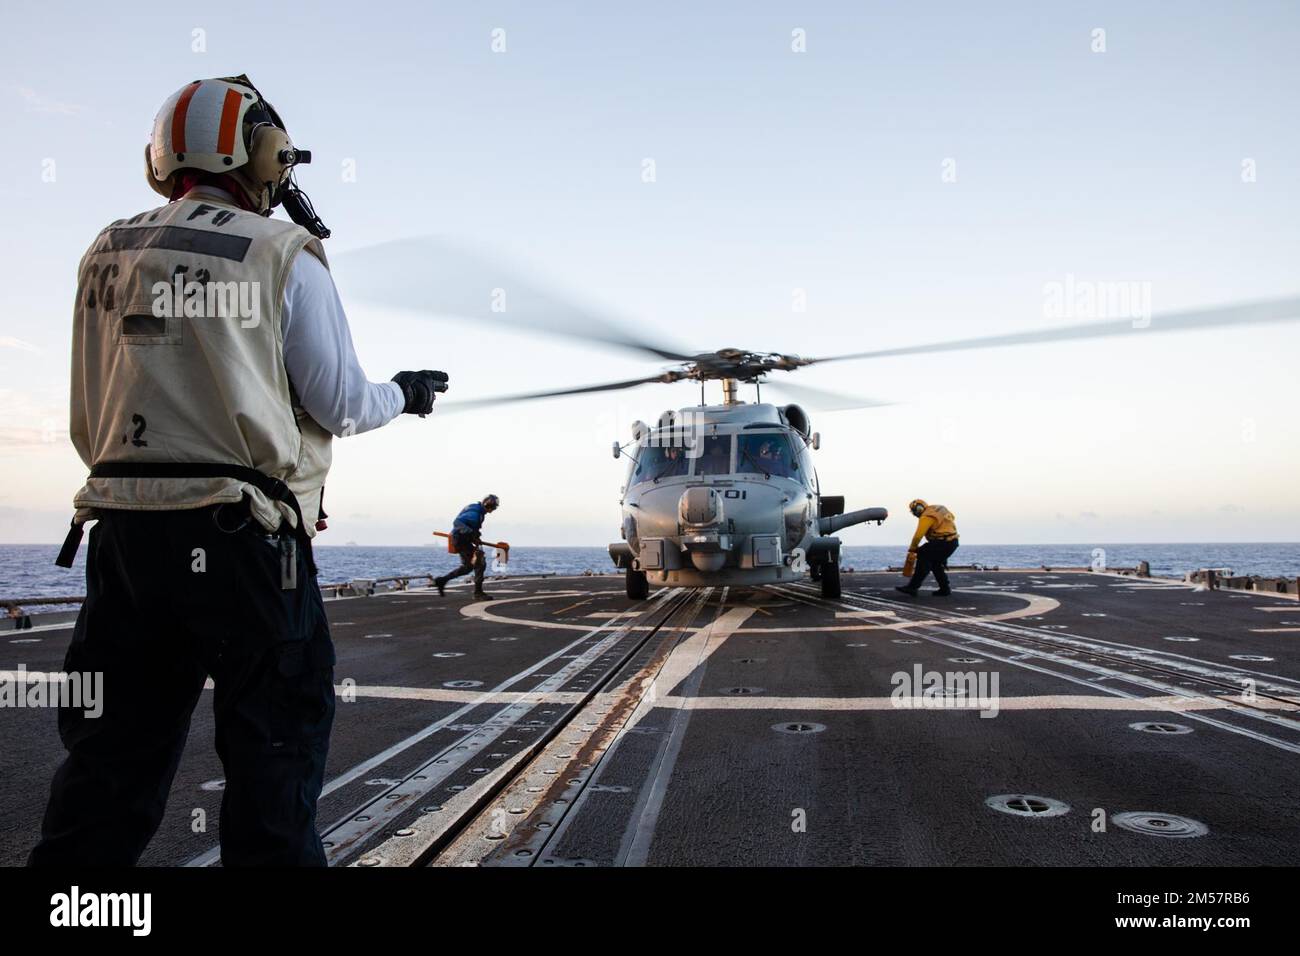 221222-N-YV347-1092 PACIFIC OCEAN (Dec. 22, 2022) U.S. Navy Boatswain’s Mate 2nd Class Joel Dominic Lazo, from San Jose, Calif., signals to the pilot of an MH-60R Sea Hawk helicopter assigned to the 'Battlecats' of Helicopter Maritime Strike Squadron (HSM) 73 on the flight deck of the Ticonderoga-class guided-missile cruiser USS Bunker Hill (CG 52). Bunker Hill, part of the Nimitz Carrier Strike Group, is currently underway in 7th Fleet conducting routine operations. 7th Fleet is the U.S. Navy ‘s largest forward-deployed numbered fleet, and routinely interacts and operates with 35 maritime nat Stock Photo